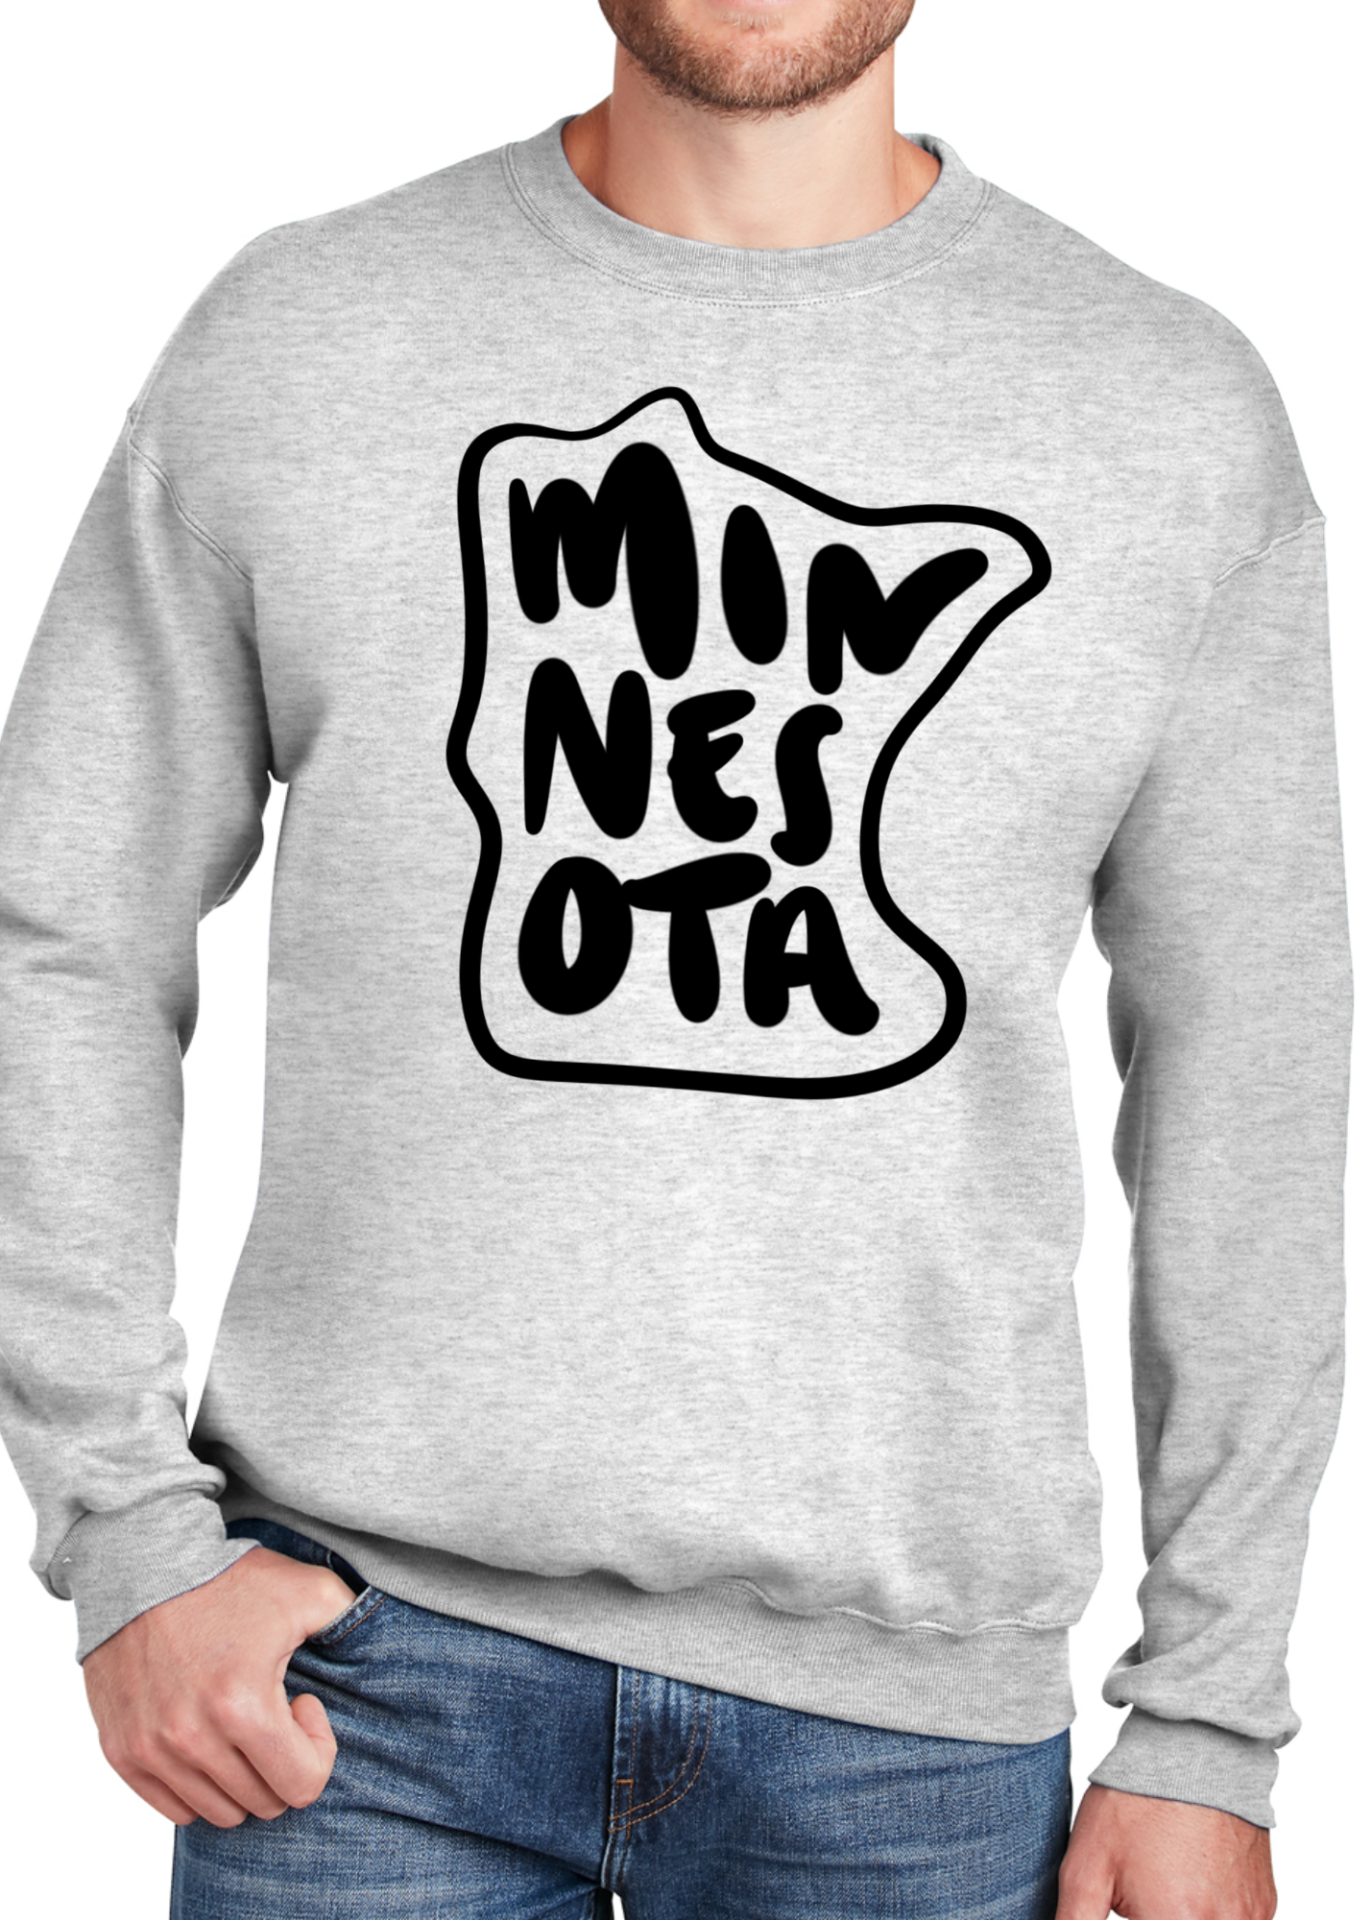 Minnesota text in the shape of Minnesota in black ink on a gray crewneck